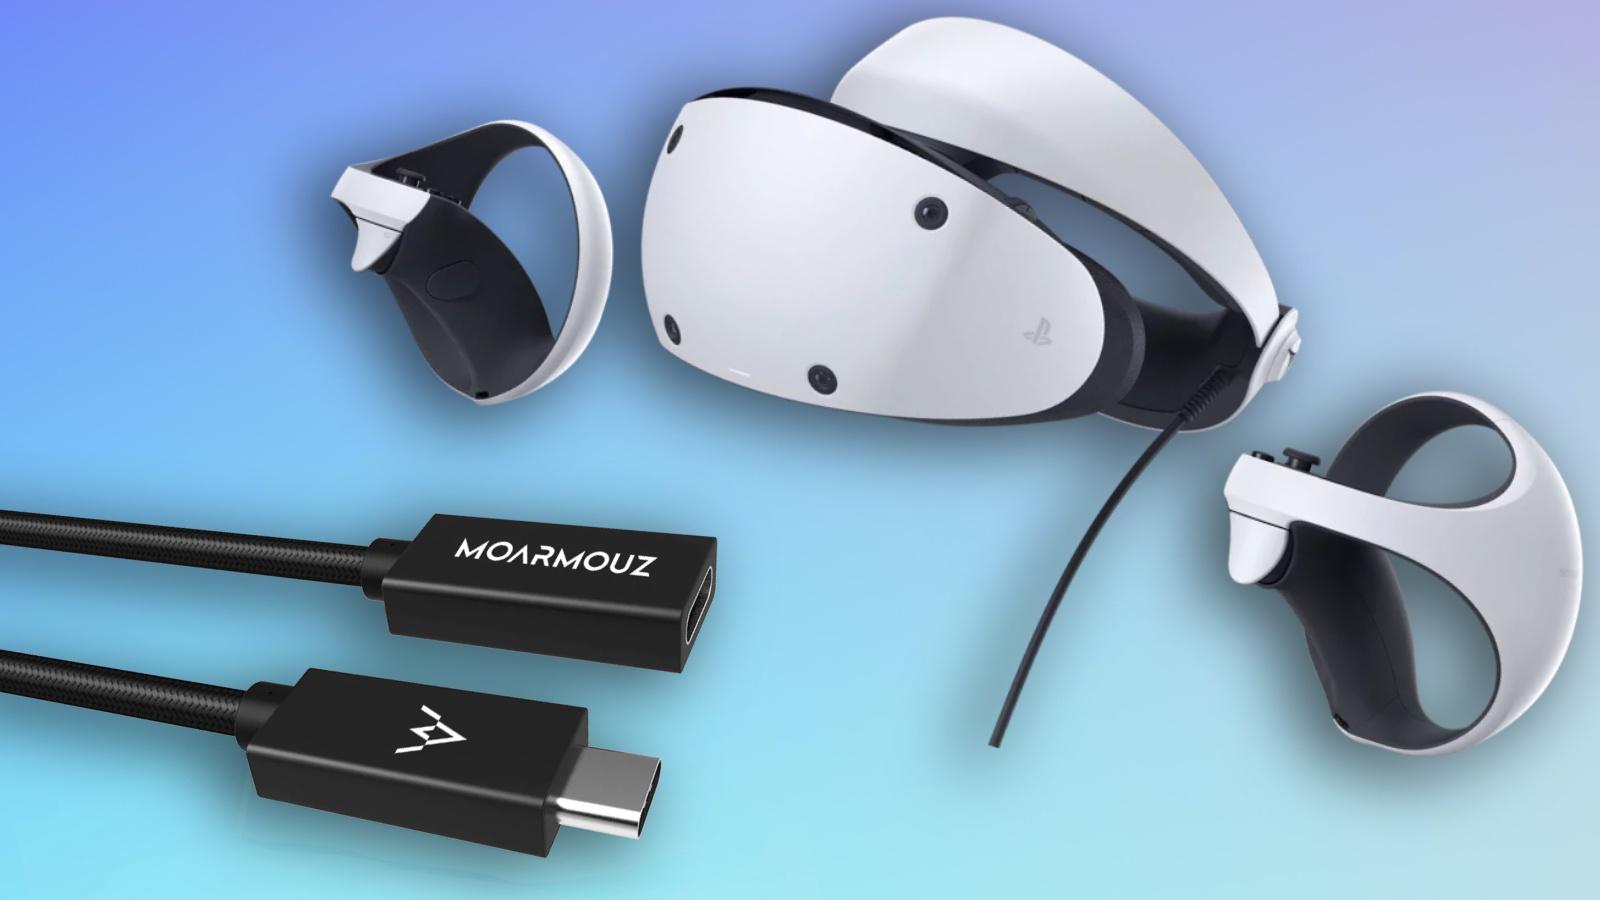 PSVR2 with a USB-C cable extension on a blue background